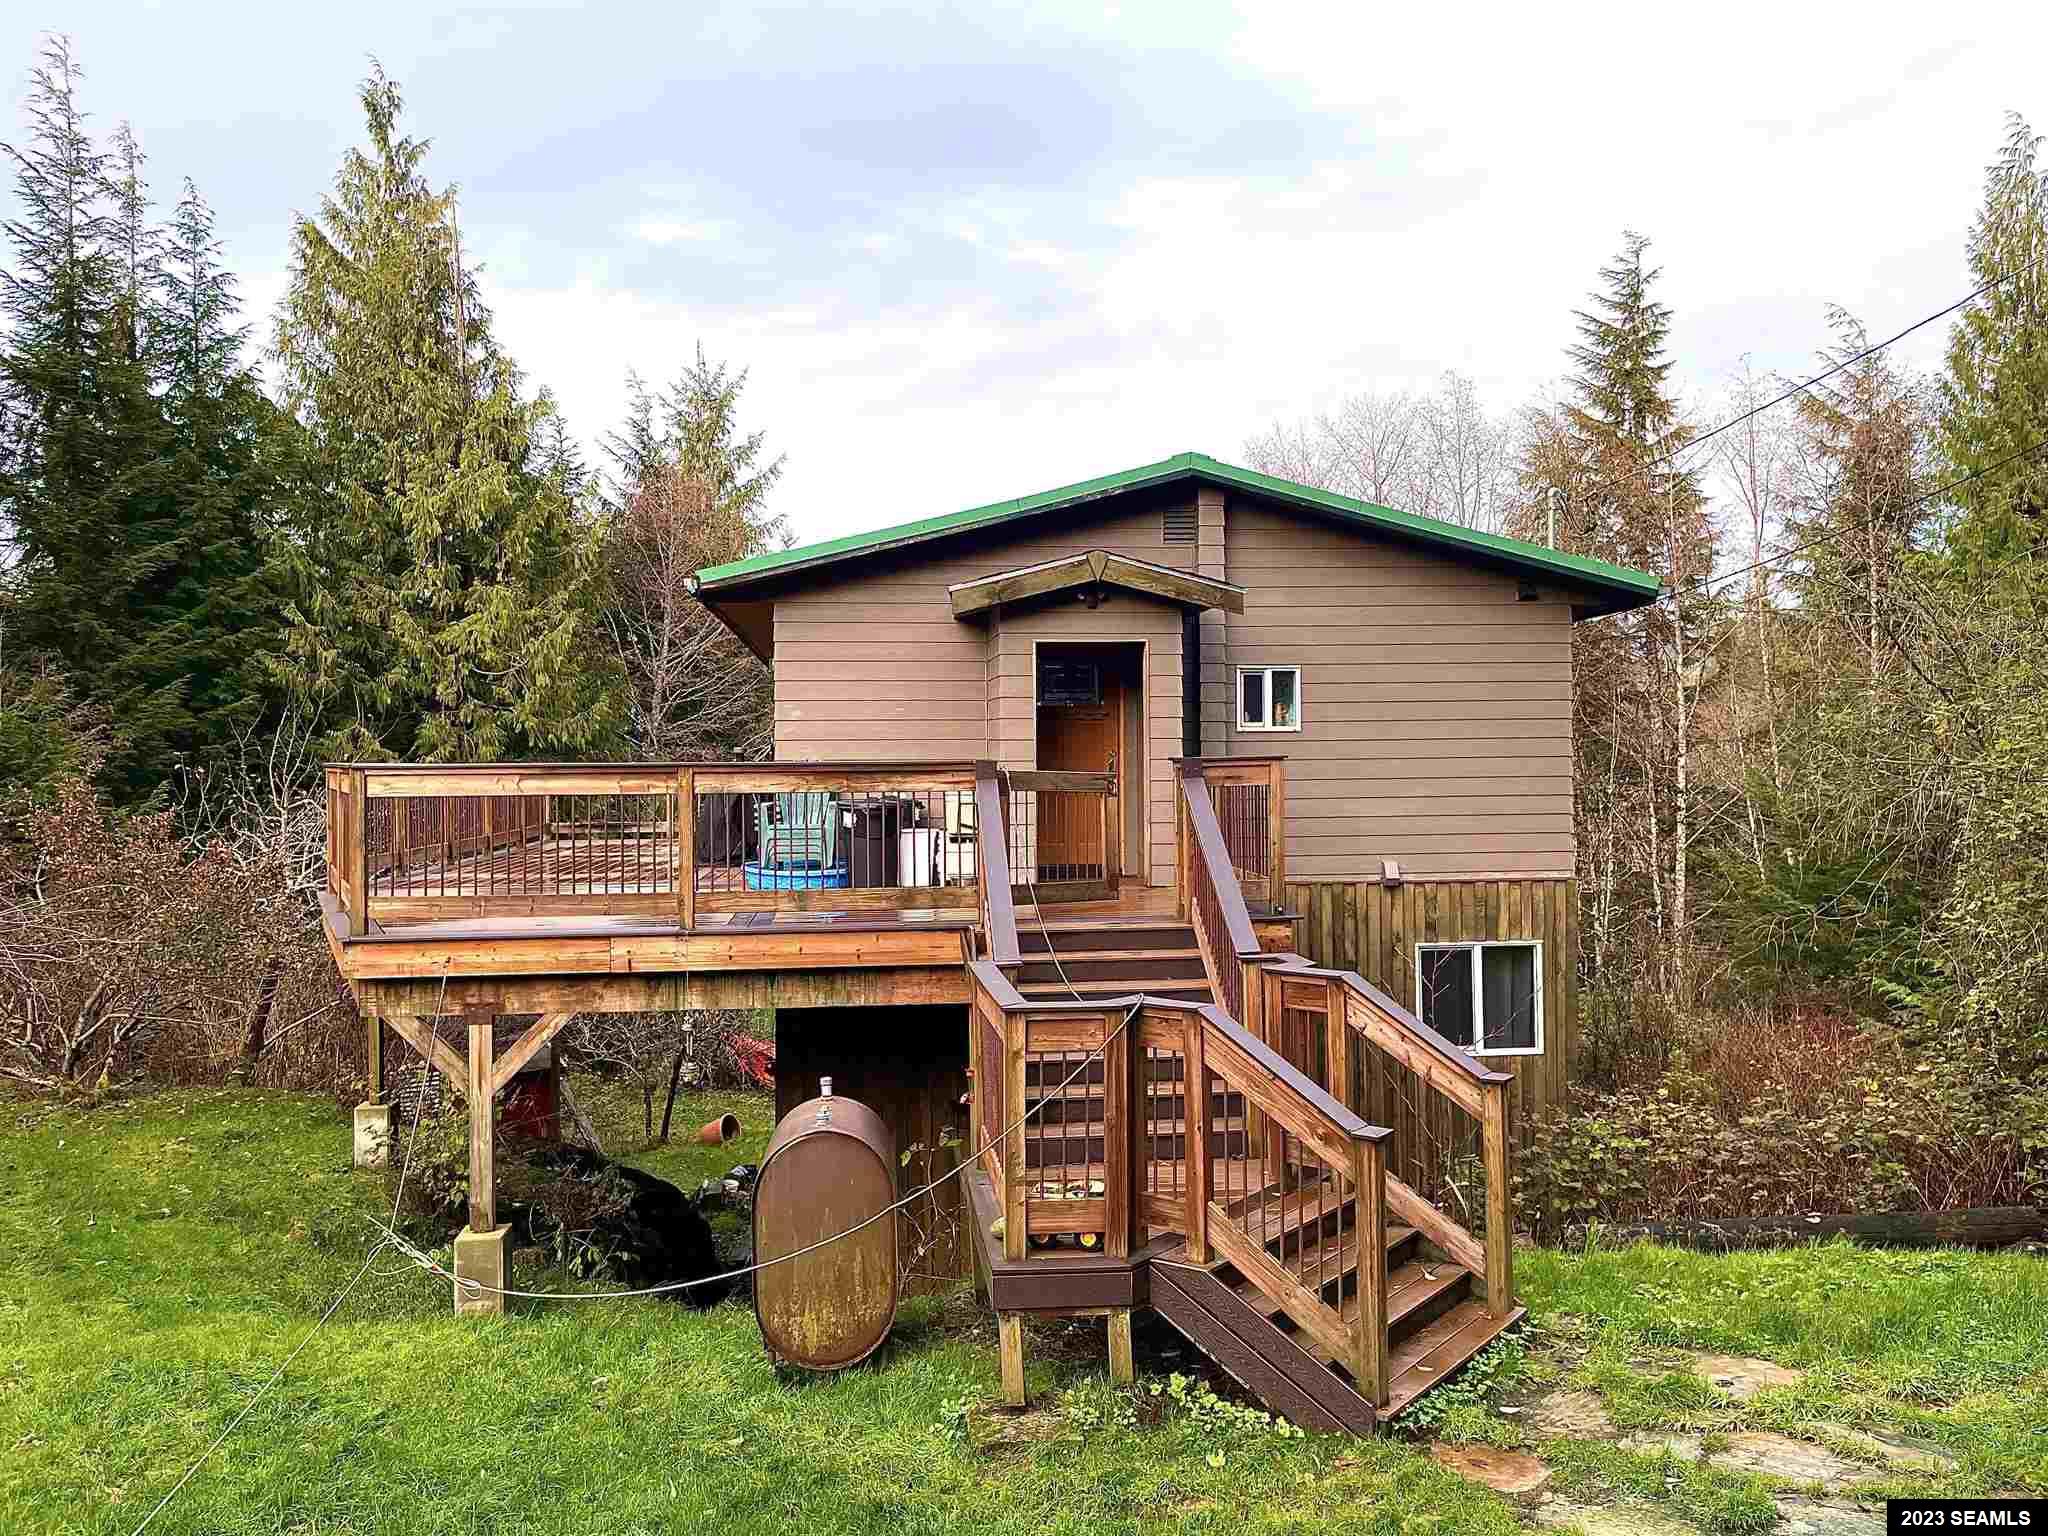 14695 Tongass Hwy., Ketchikan, AK 99901, 3 Bedrooms Bedrooms, ,2 BathroomsBathrooms,Residential,For Sale,Tongass Hwy.,23721